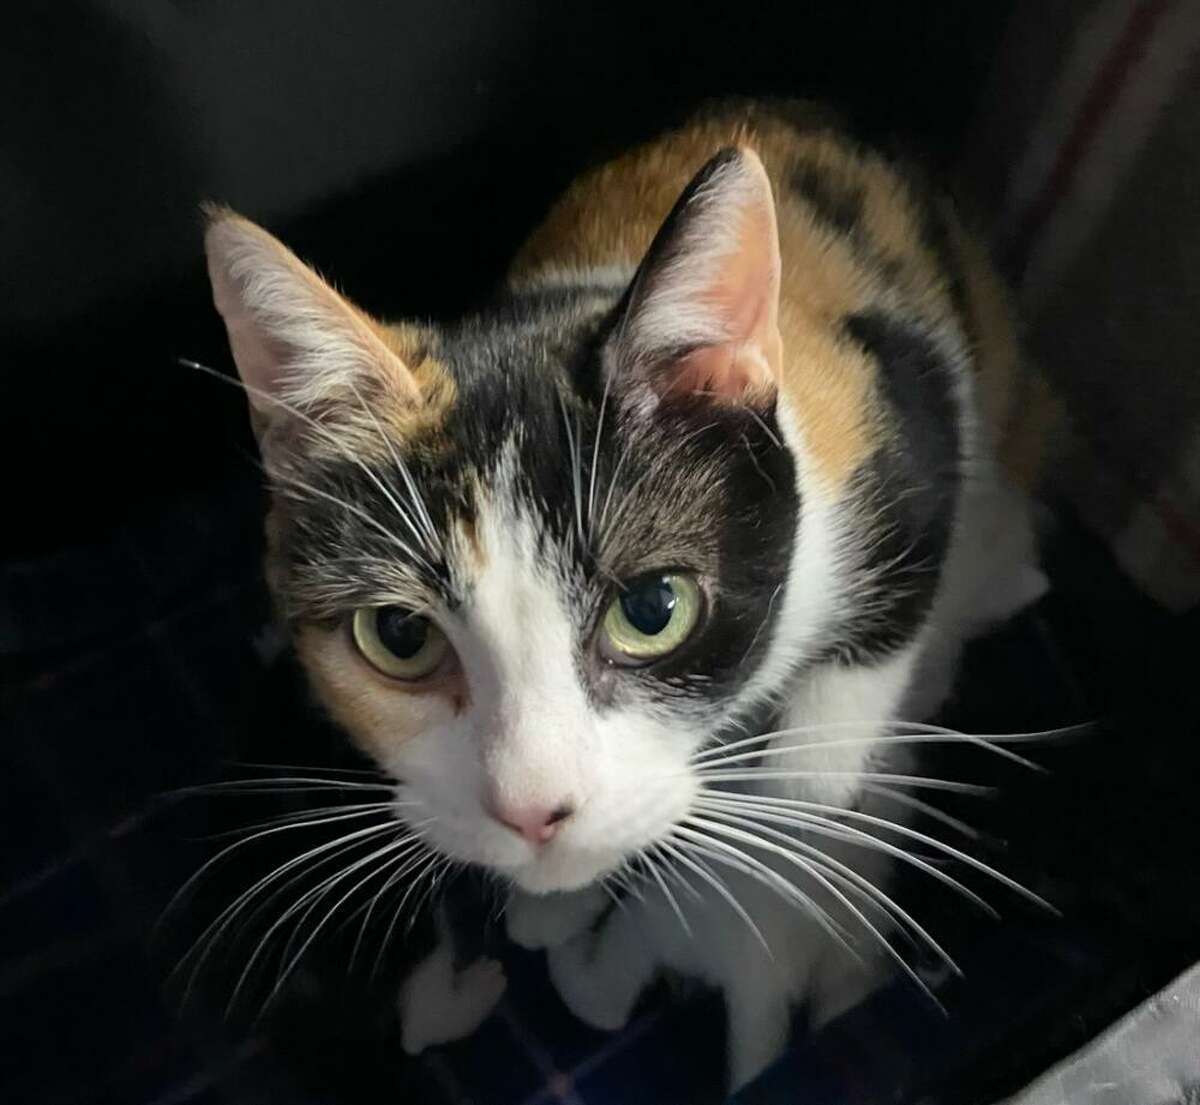 Dahlia, a “super loving and affectionate” spayed 1 1/2-year-old calico, spends her days gazing out the window at birds and stalking her toys, say staff at Bay Area Pet Adoptions, 3000 Ave. R in San Leon. Learn more at www.bayareapetadoptions.org.